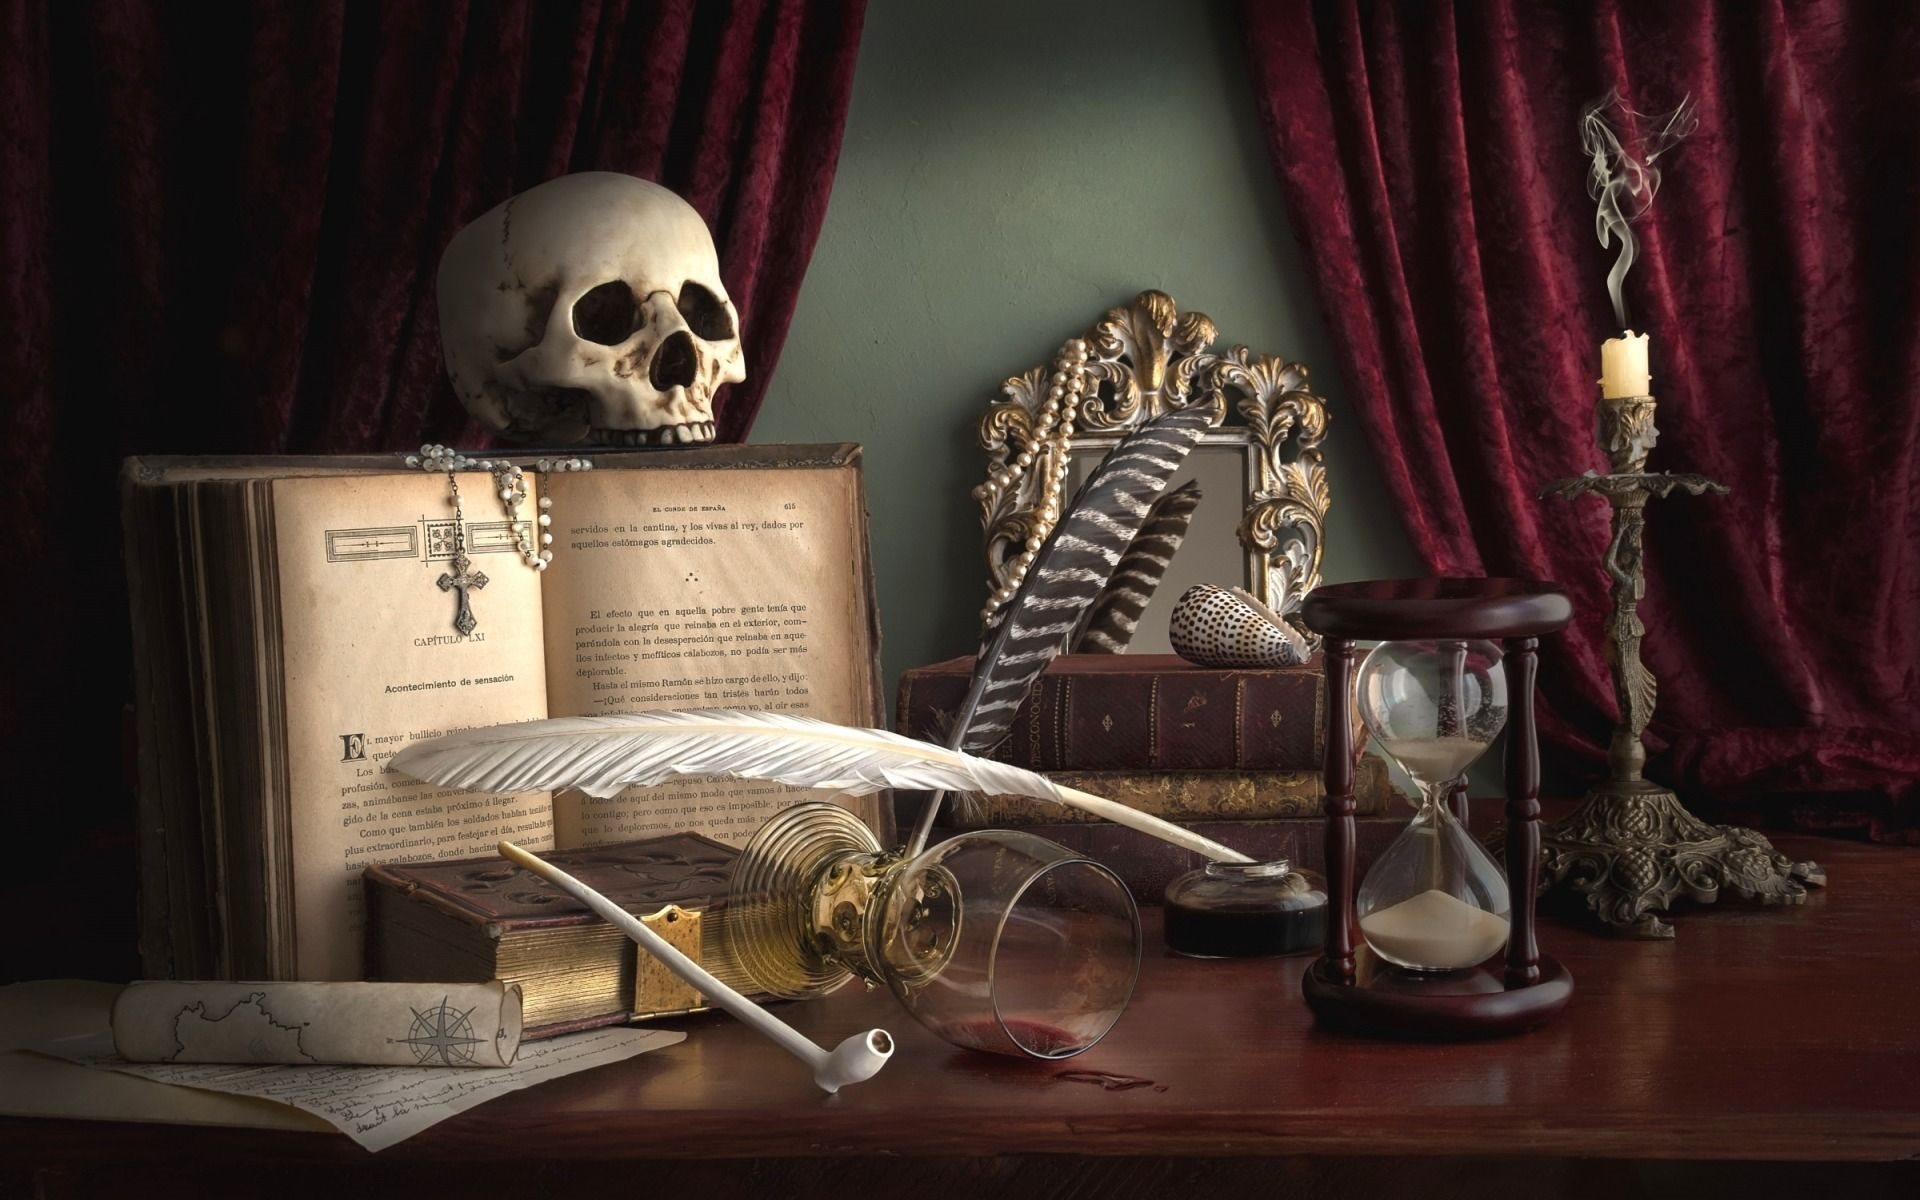 Pen, Hourglass, Tube, Vintage Still Life, Candle - Candle Glass Books Skull - HD Wallpaper 